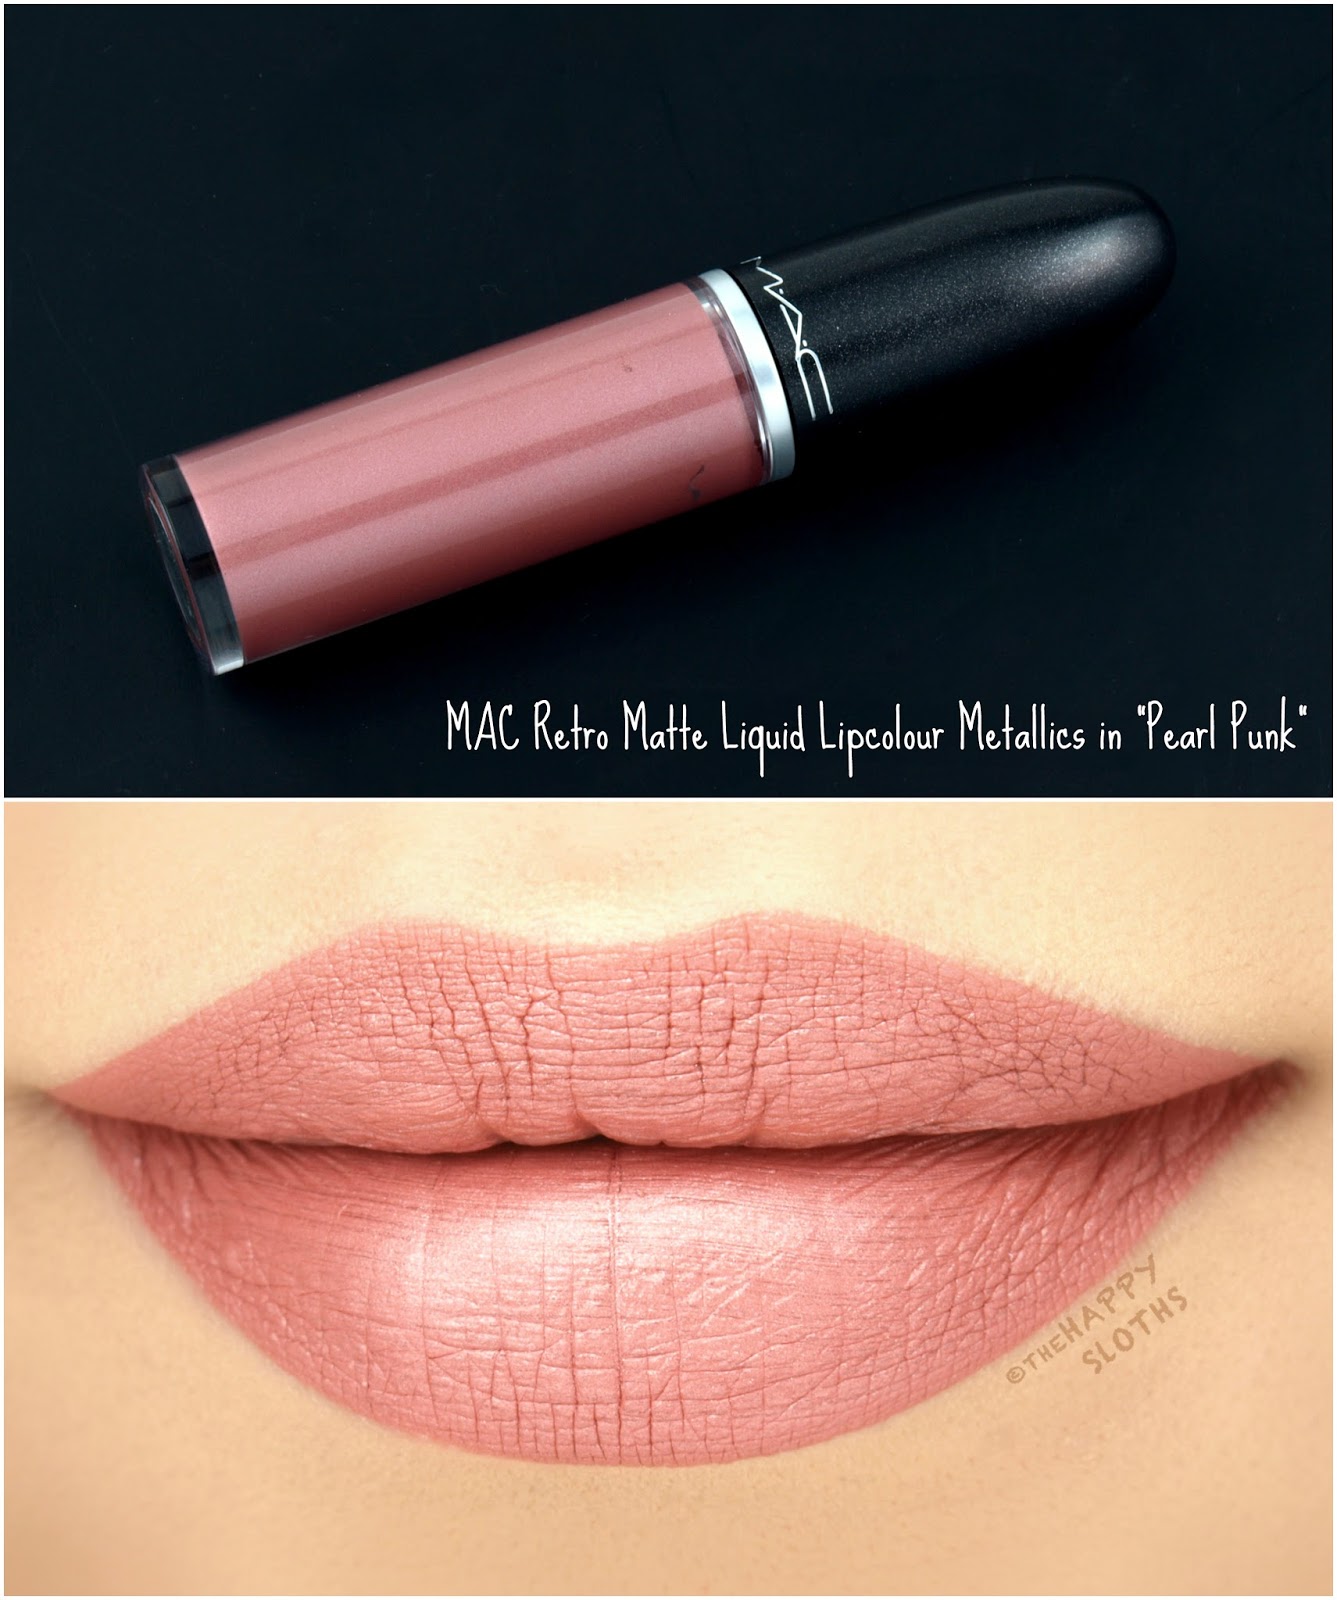 broeden Pittig enz MAC Retro Matte Liquid Lipcolour Metallics: Review and Swatches | The Happy  Sloths: Beauty, Makeup, and Skincare Blog with Reviews and Swatches